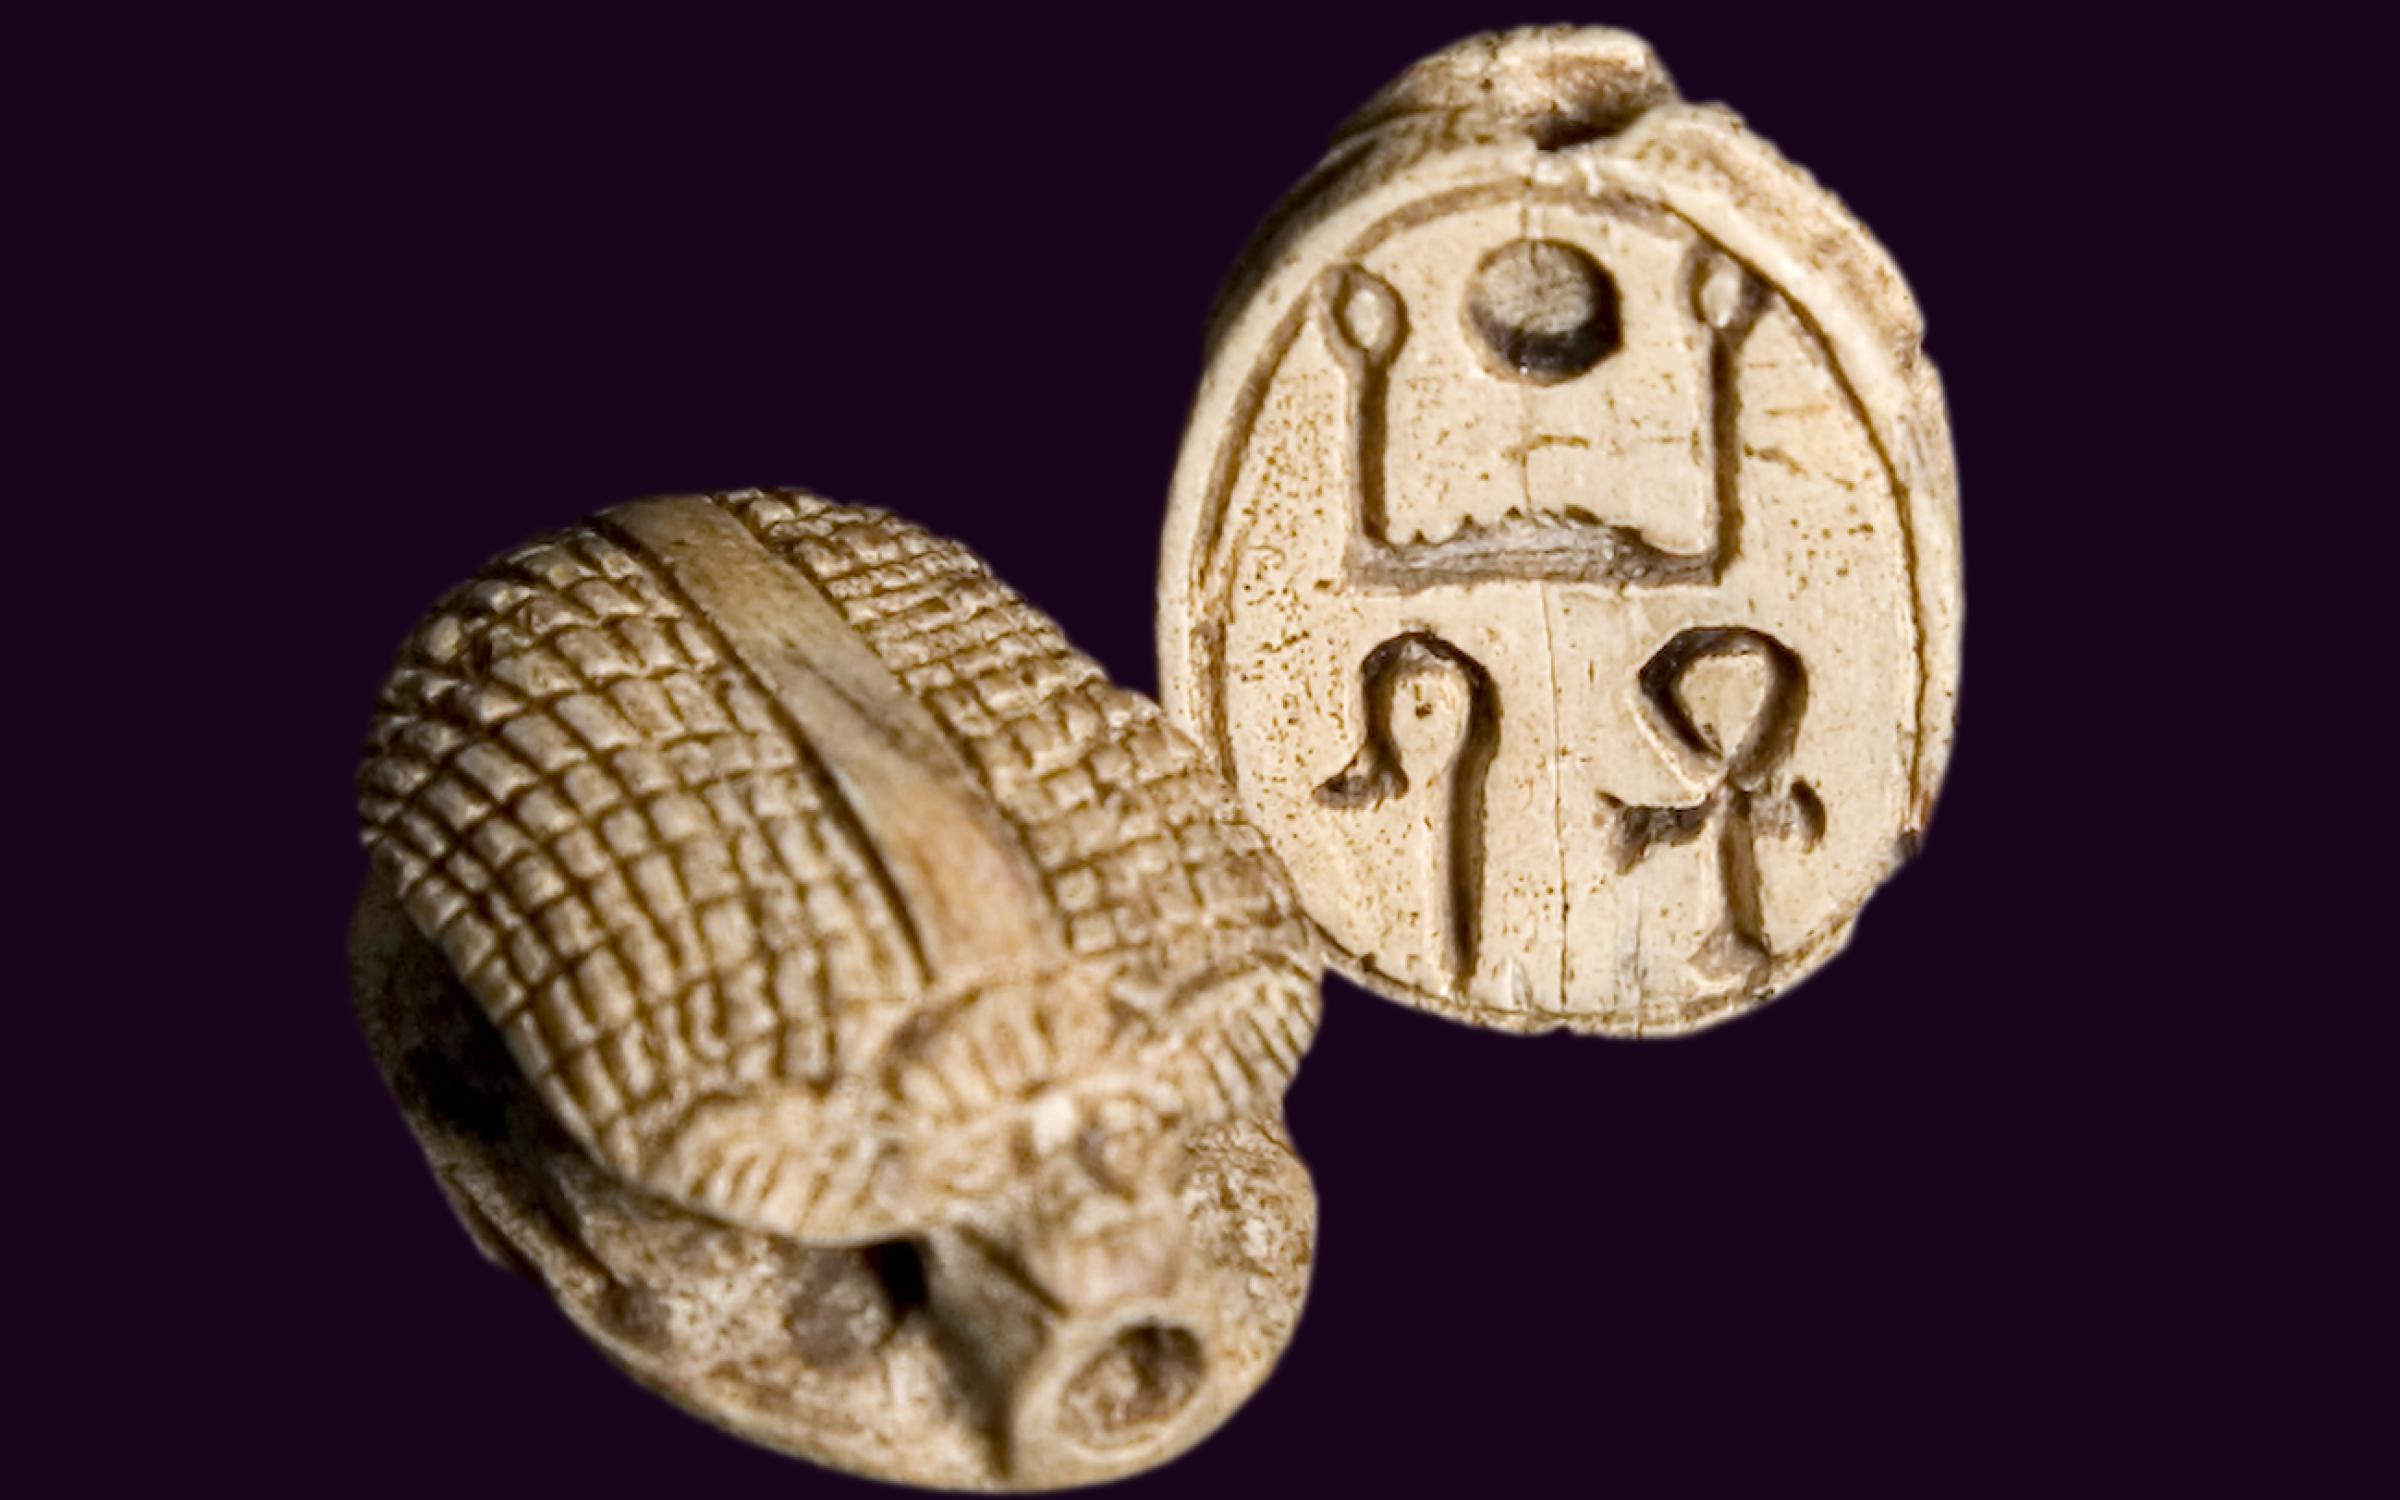 A close up of two Egyptian scarabs, round with markings